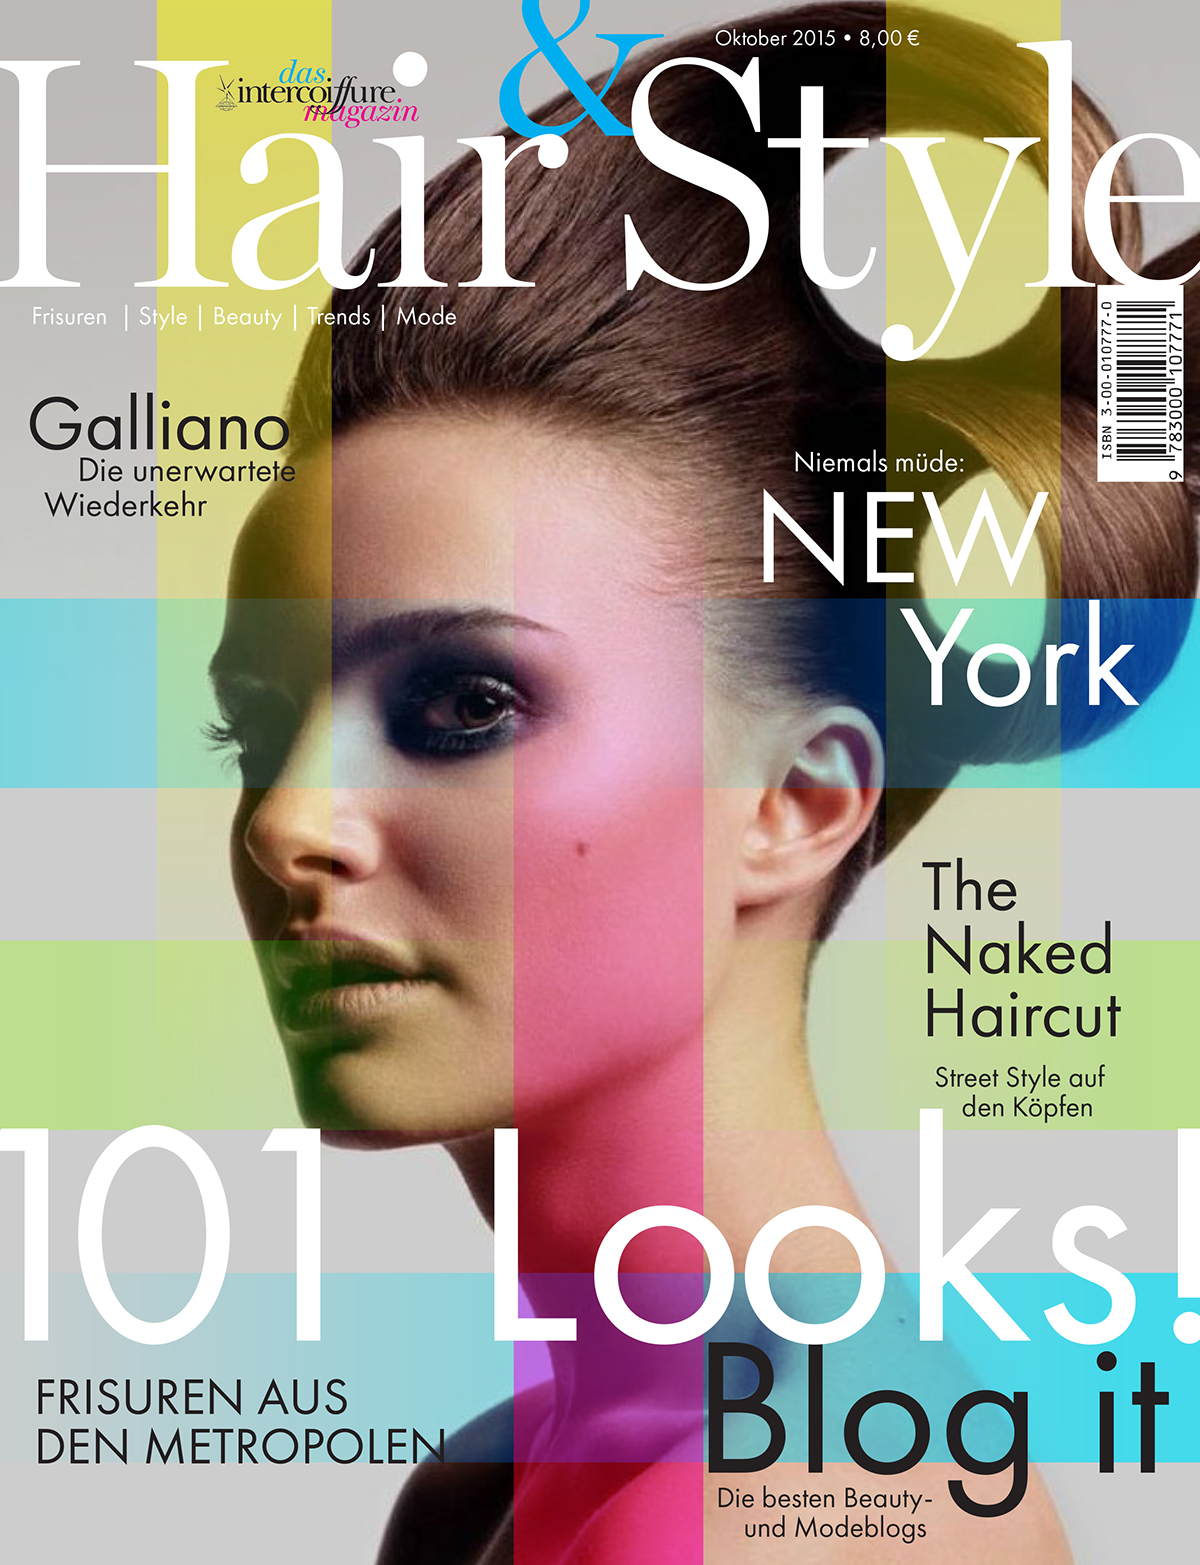 Hair And Style Beauty Fashion Magazine on Behance